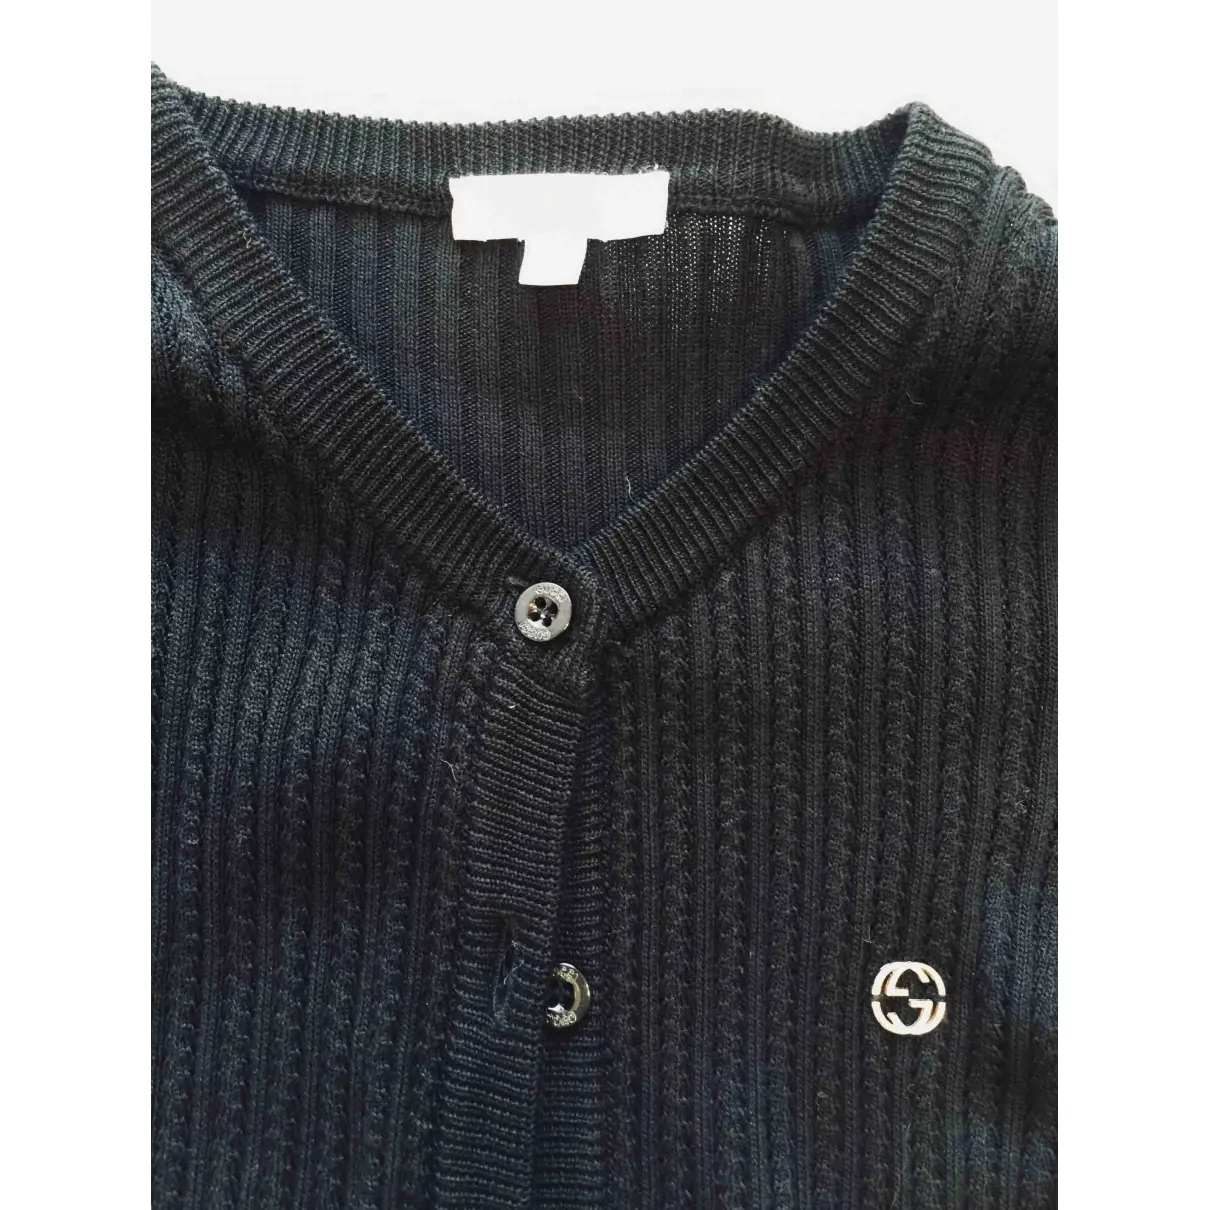 Gucci Wool sweater for sale